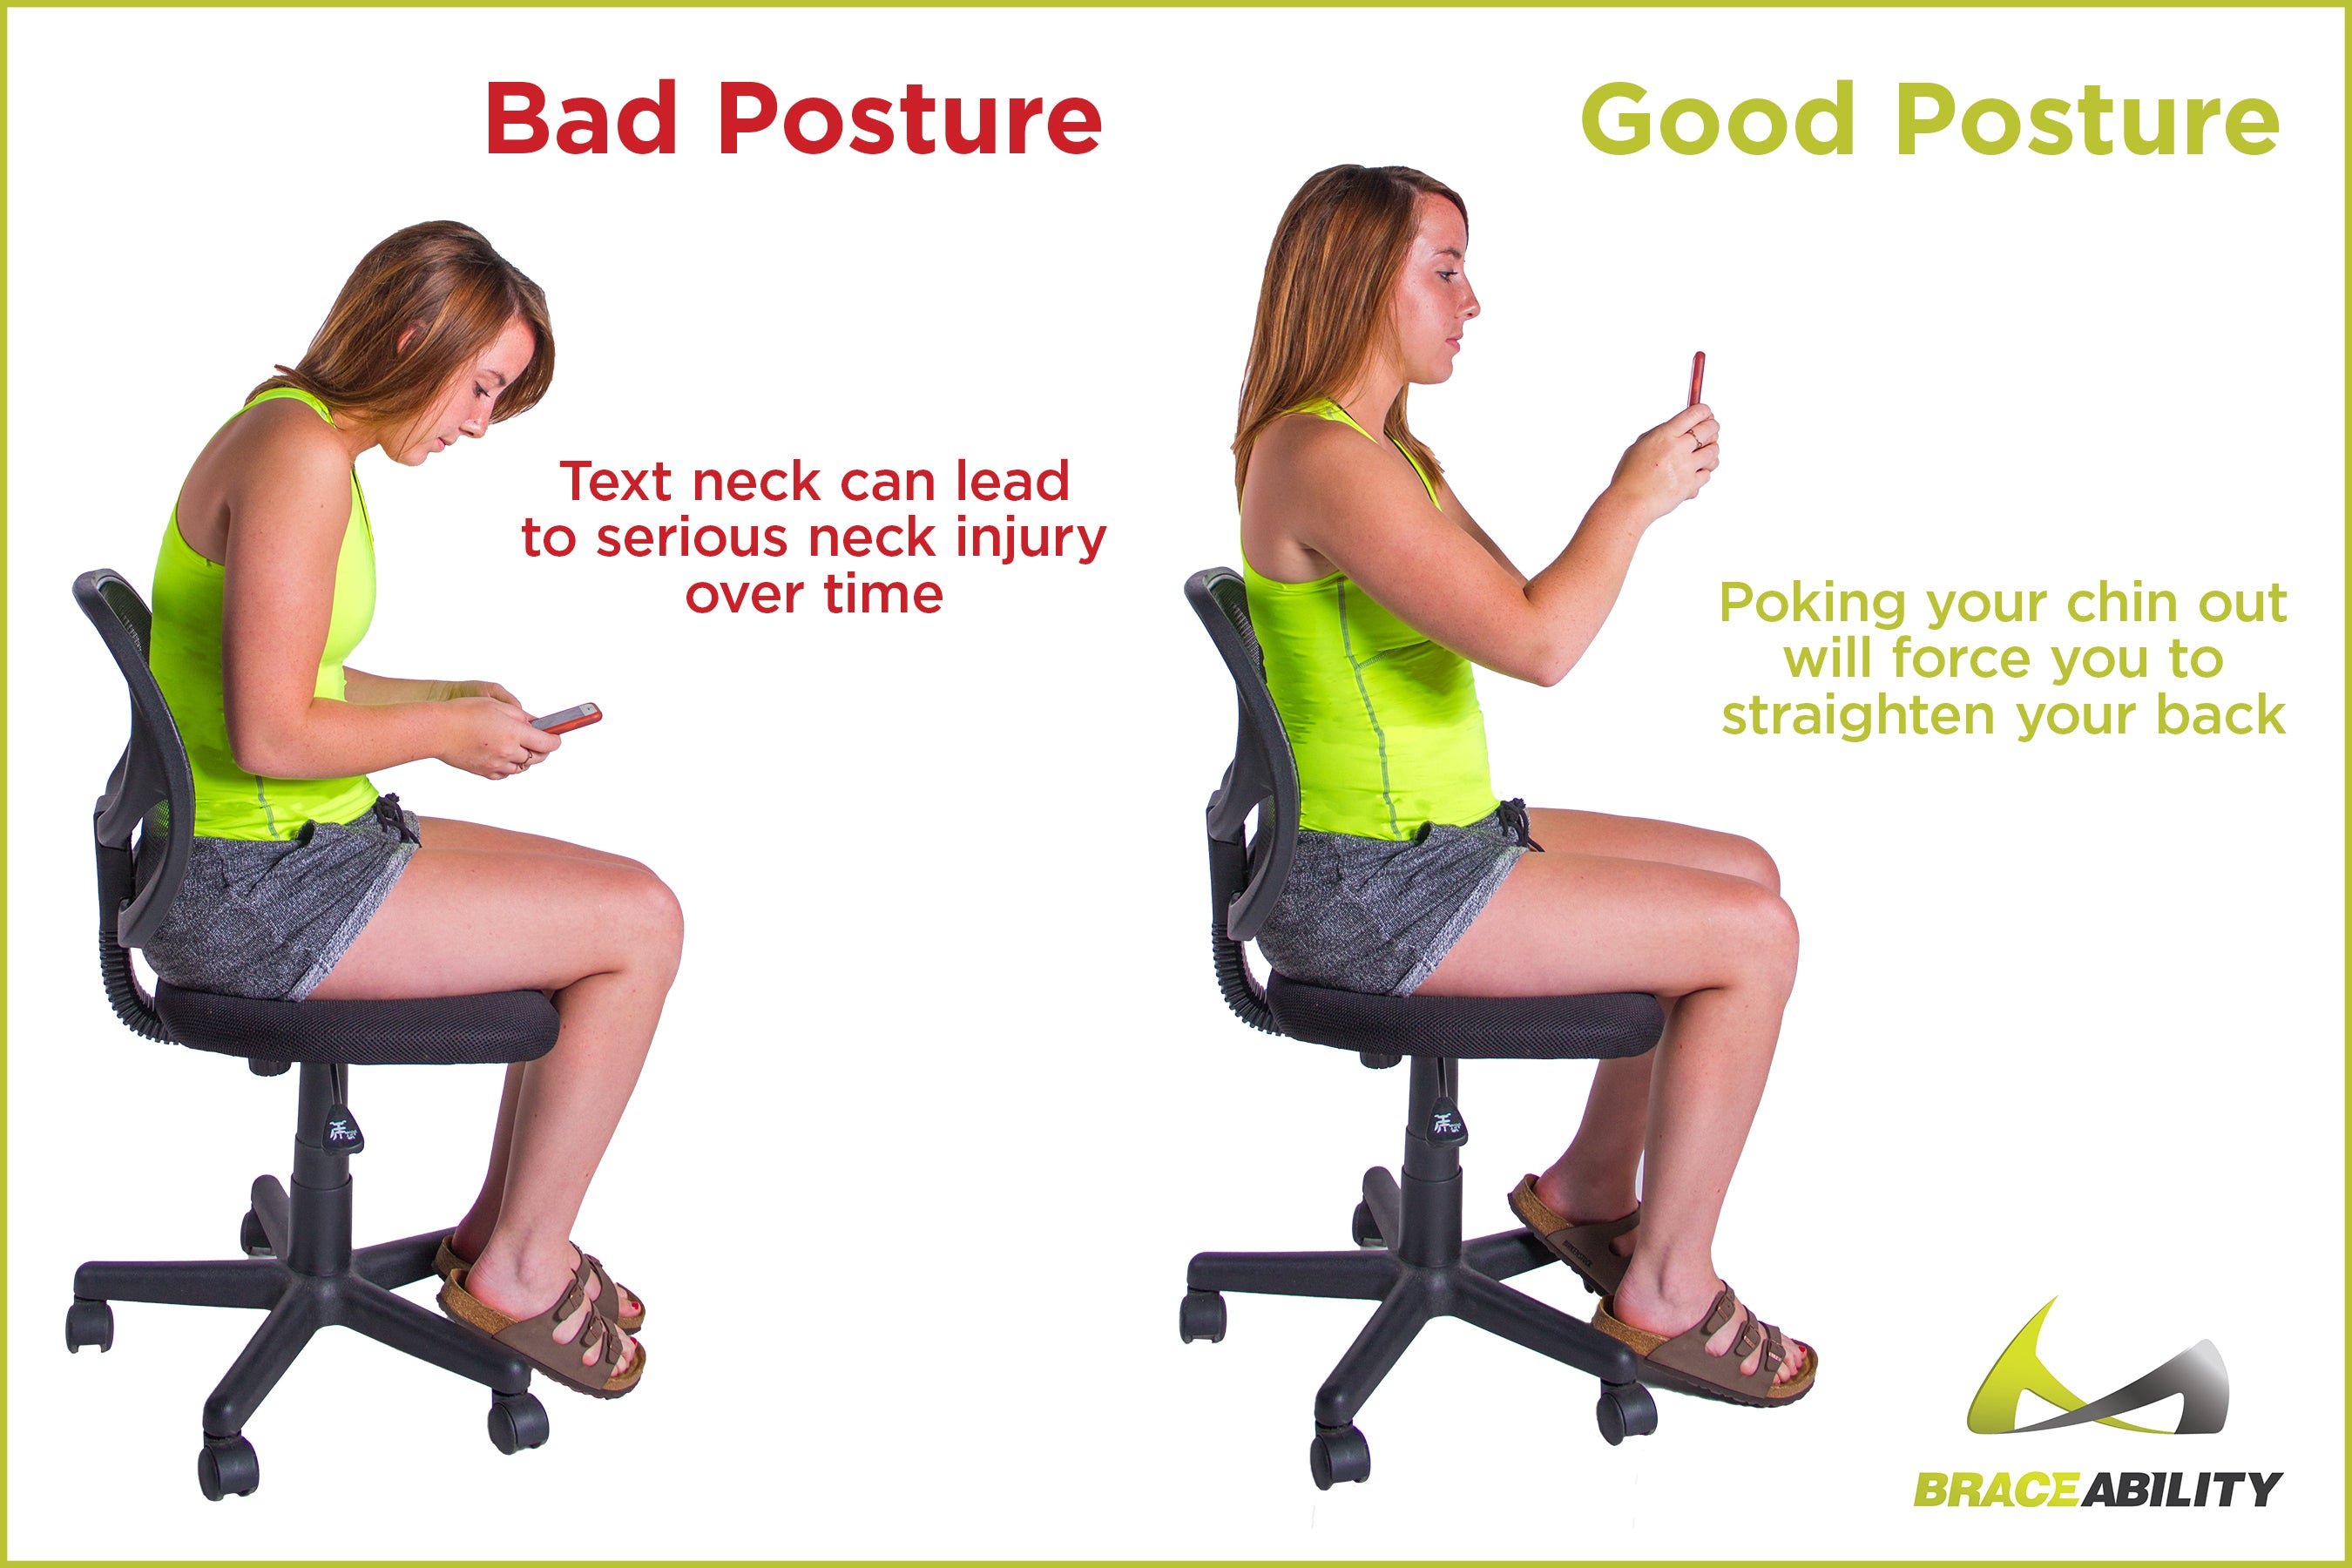 Proper sitting posture so you don't develop text neck